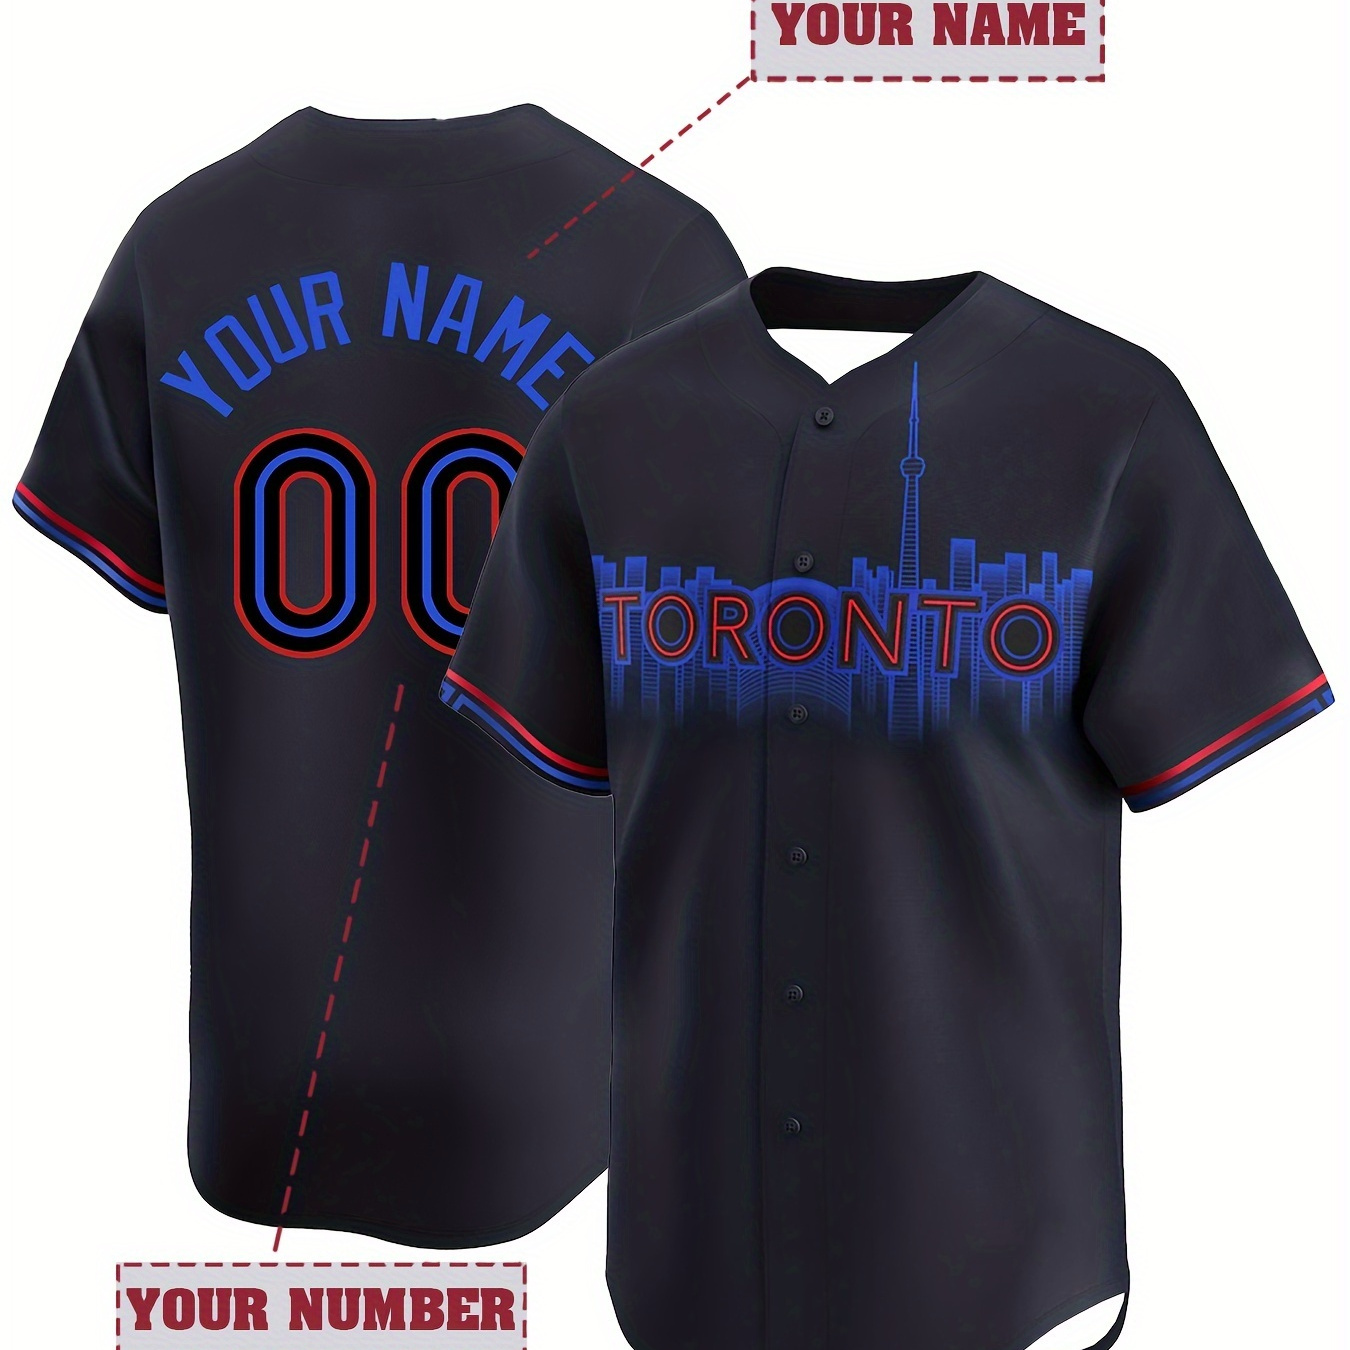 

Men's "toronto" Baseball Jersey With Customized Name And Number, Comfy Top For Summer Sport